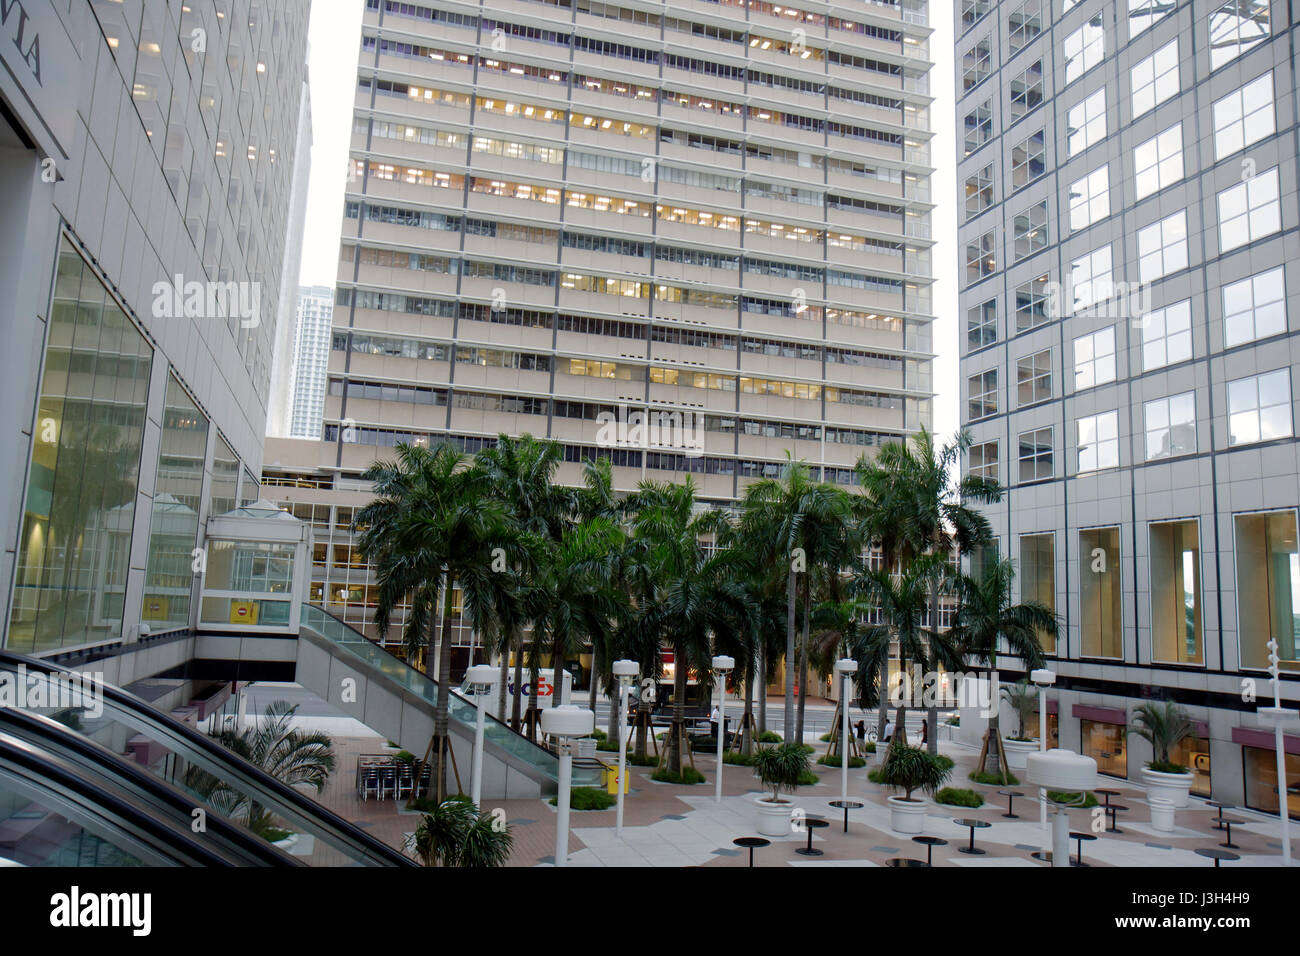 Miami Florida,Southeast Financial Center,Southeast,centre,plaza,office building,glass,after hours,palm trees,tree,tables,courtyard,architecture FL0809 Stock Photo